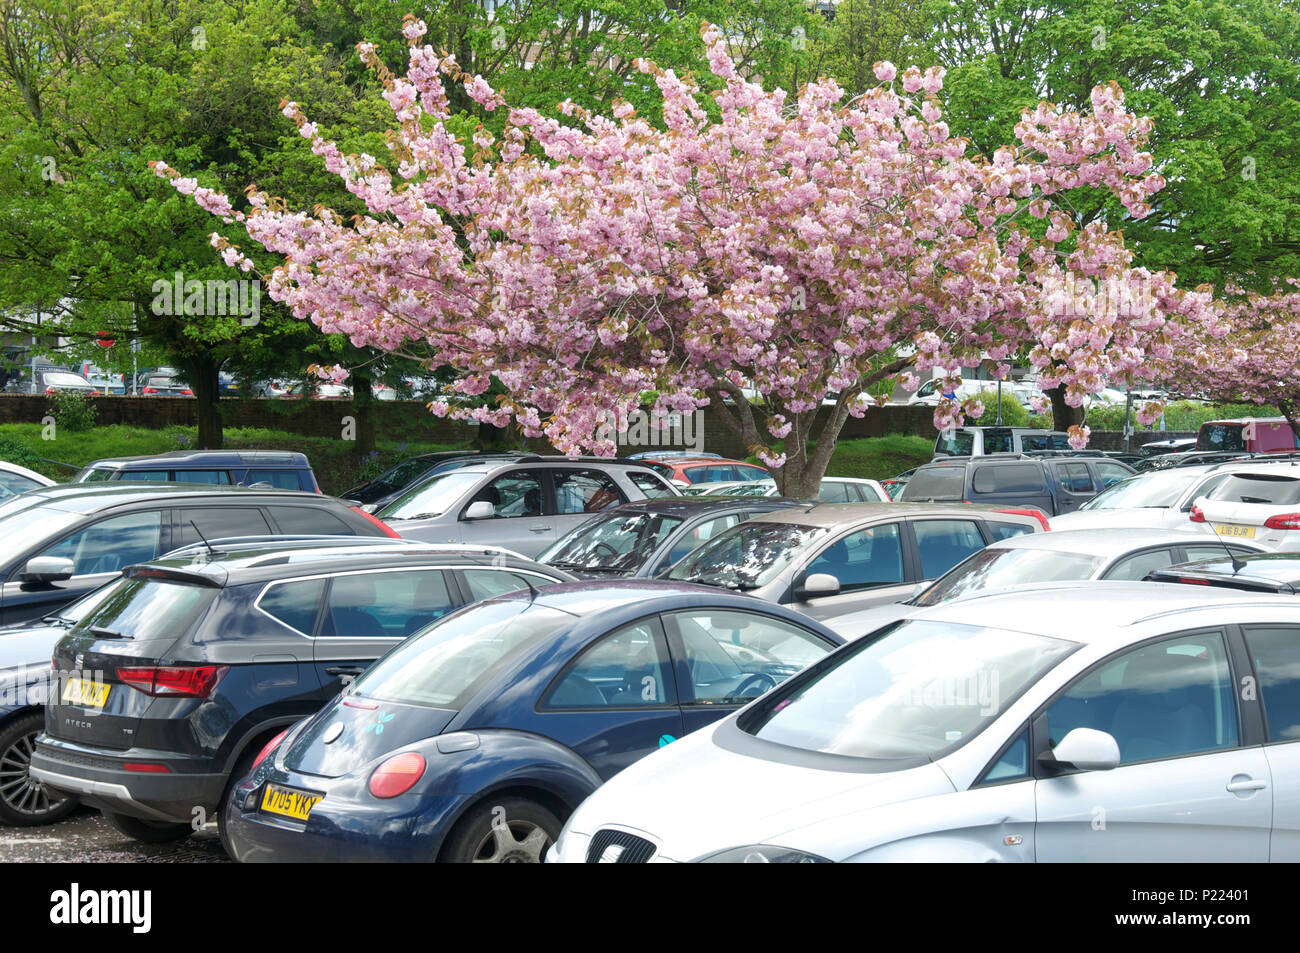 Ornamental Cherry Blossom Tree, in bloom, growing in an urban car park. These decorative shade trees are tolerant of atmospheric pollution. England UK Stock Photo